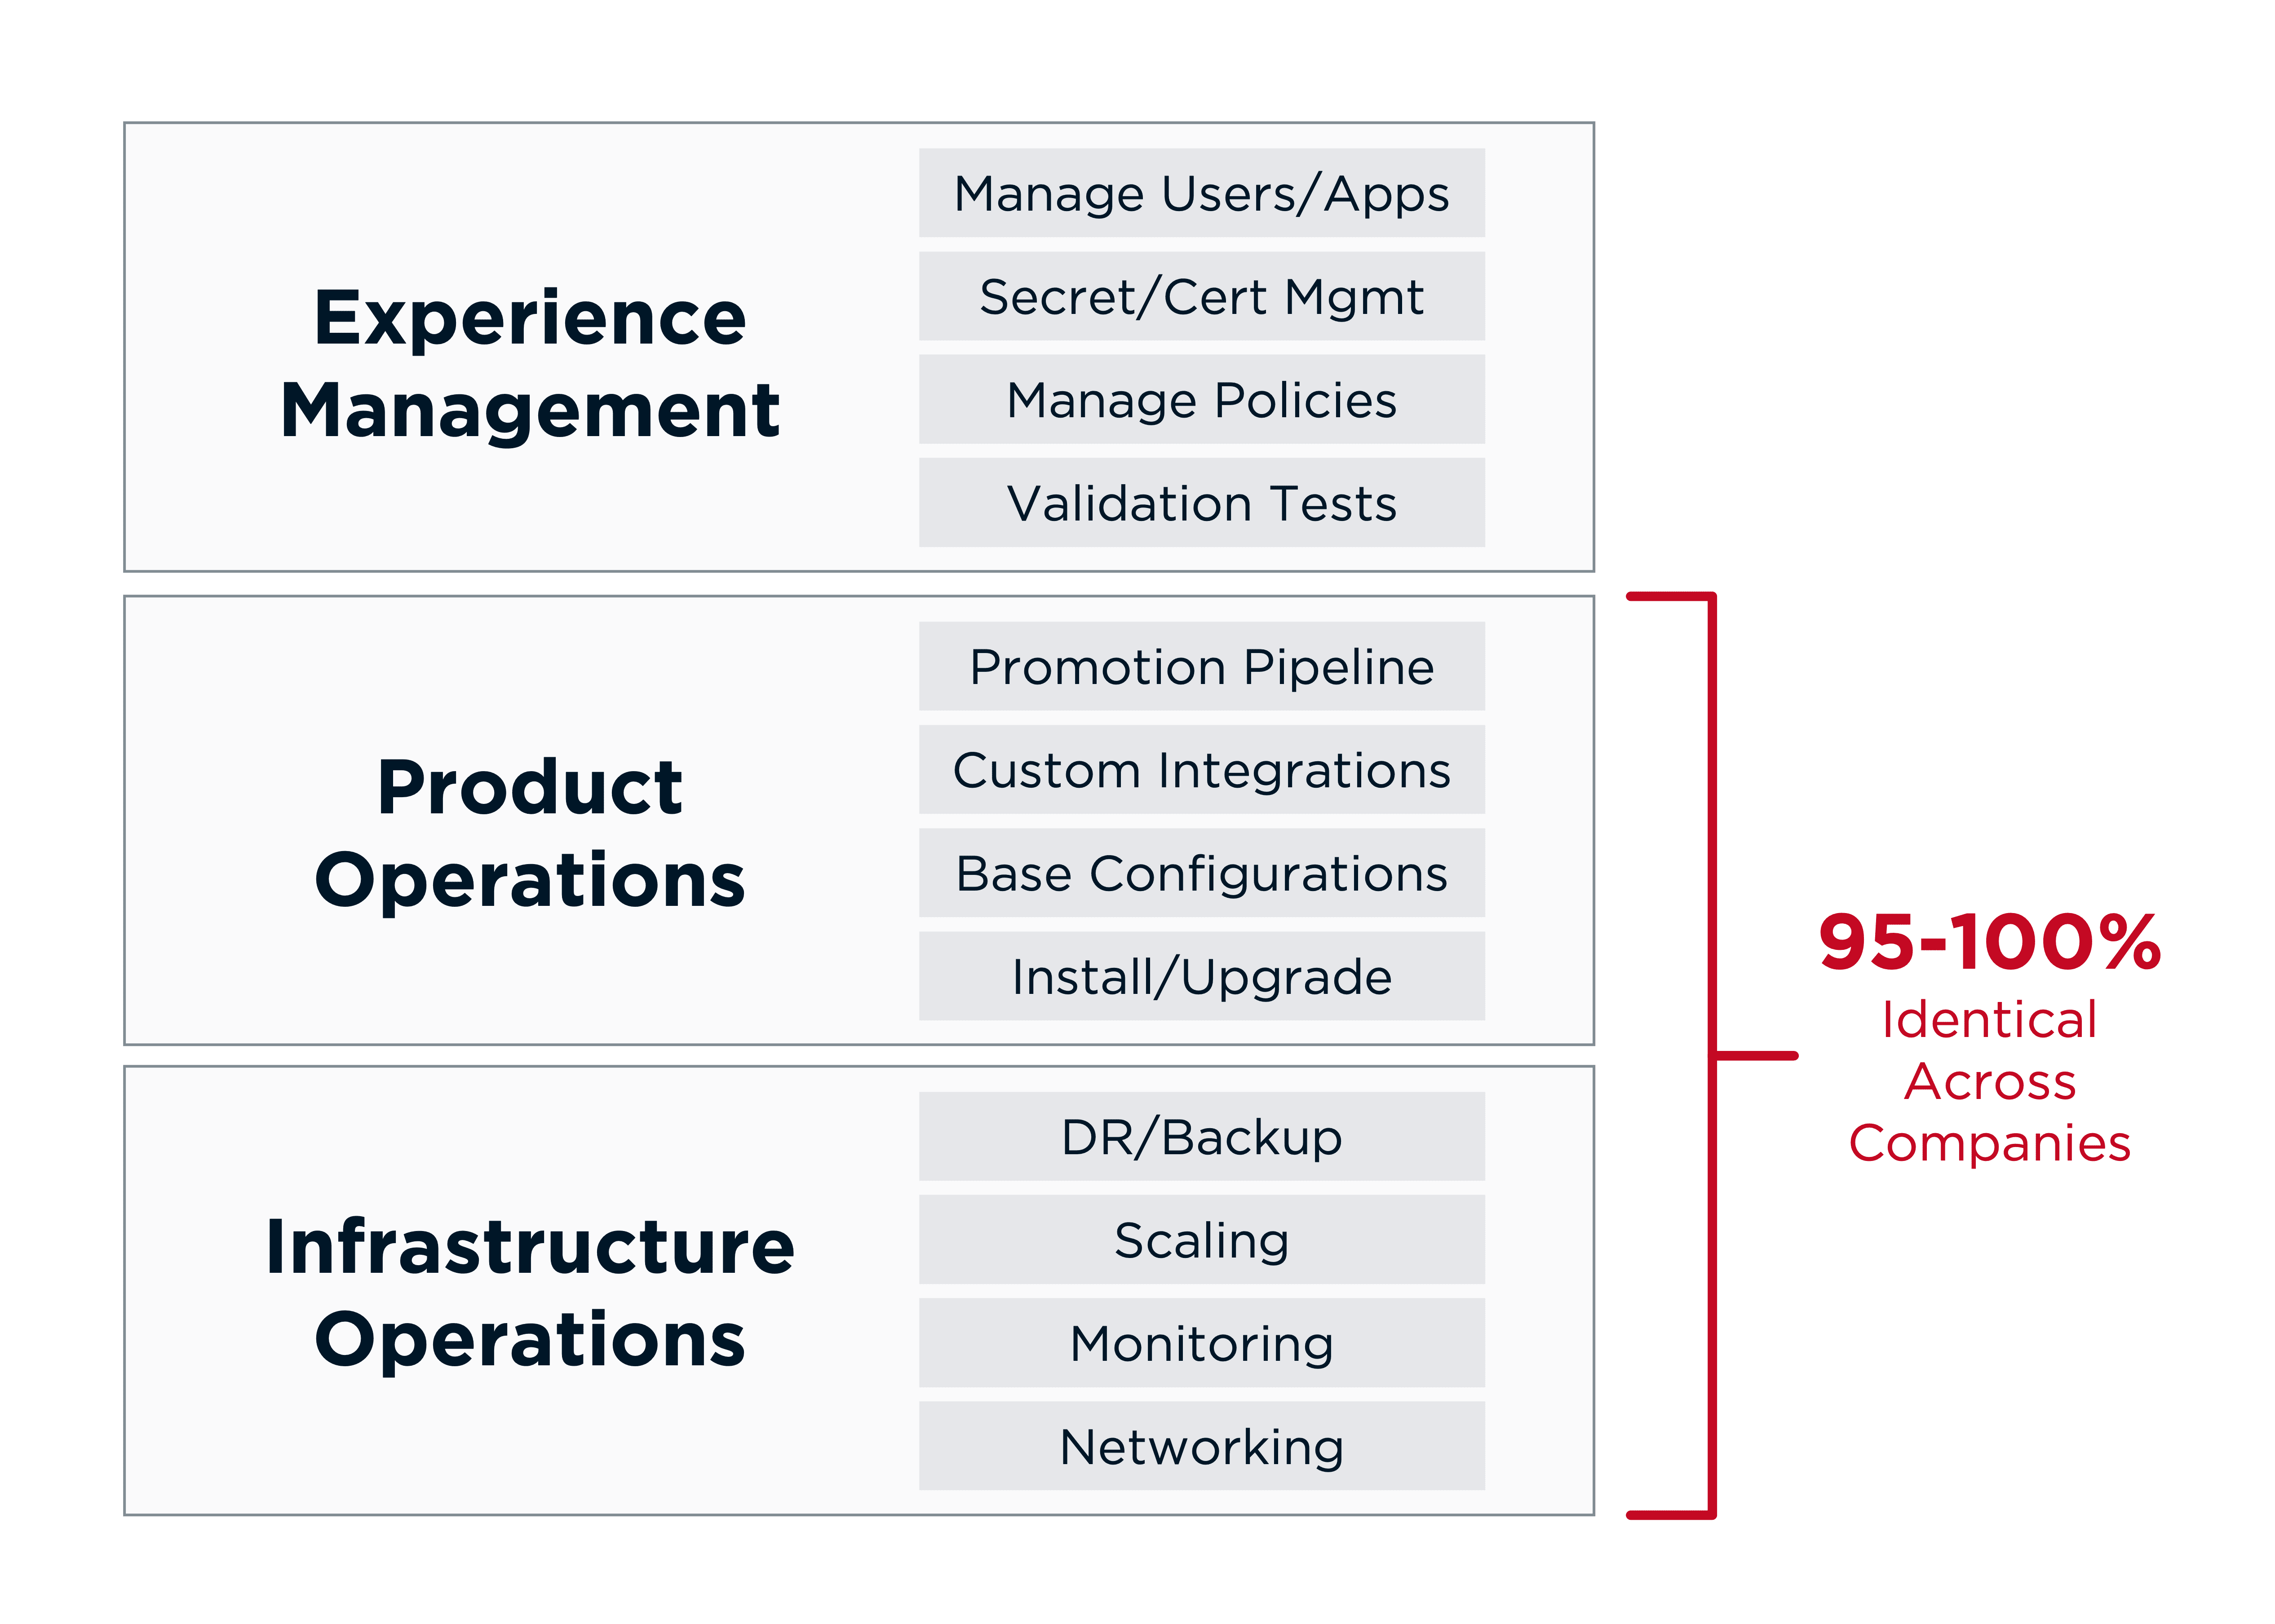 An overview of three general areas of software management responsibility indicates that product and infrastructure operations are 95-100% identical across companies.